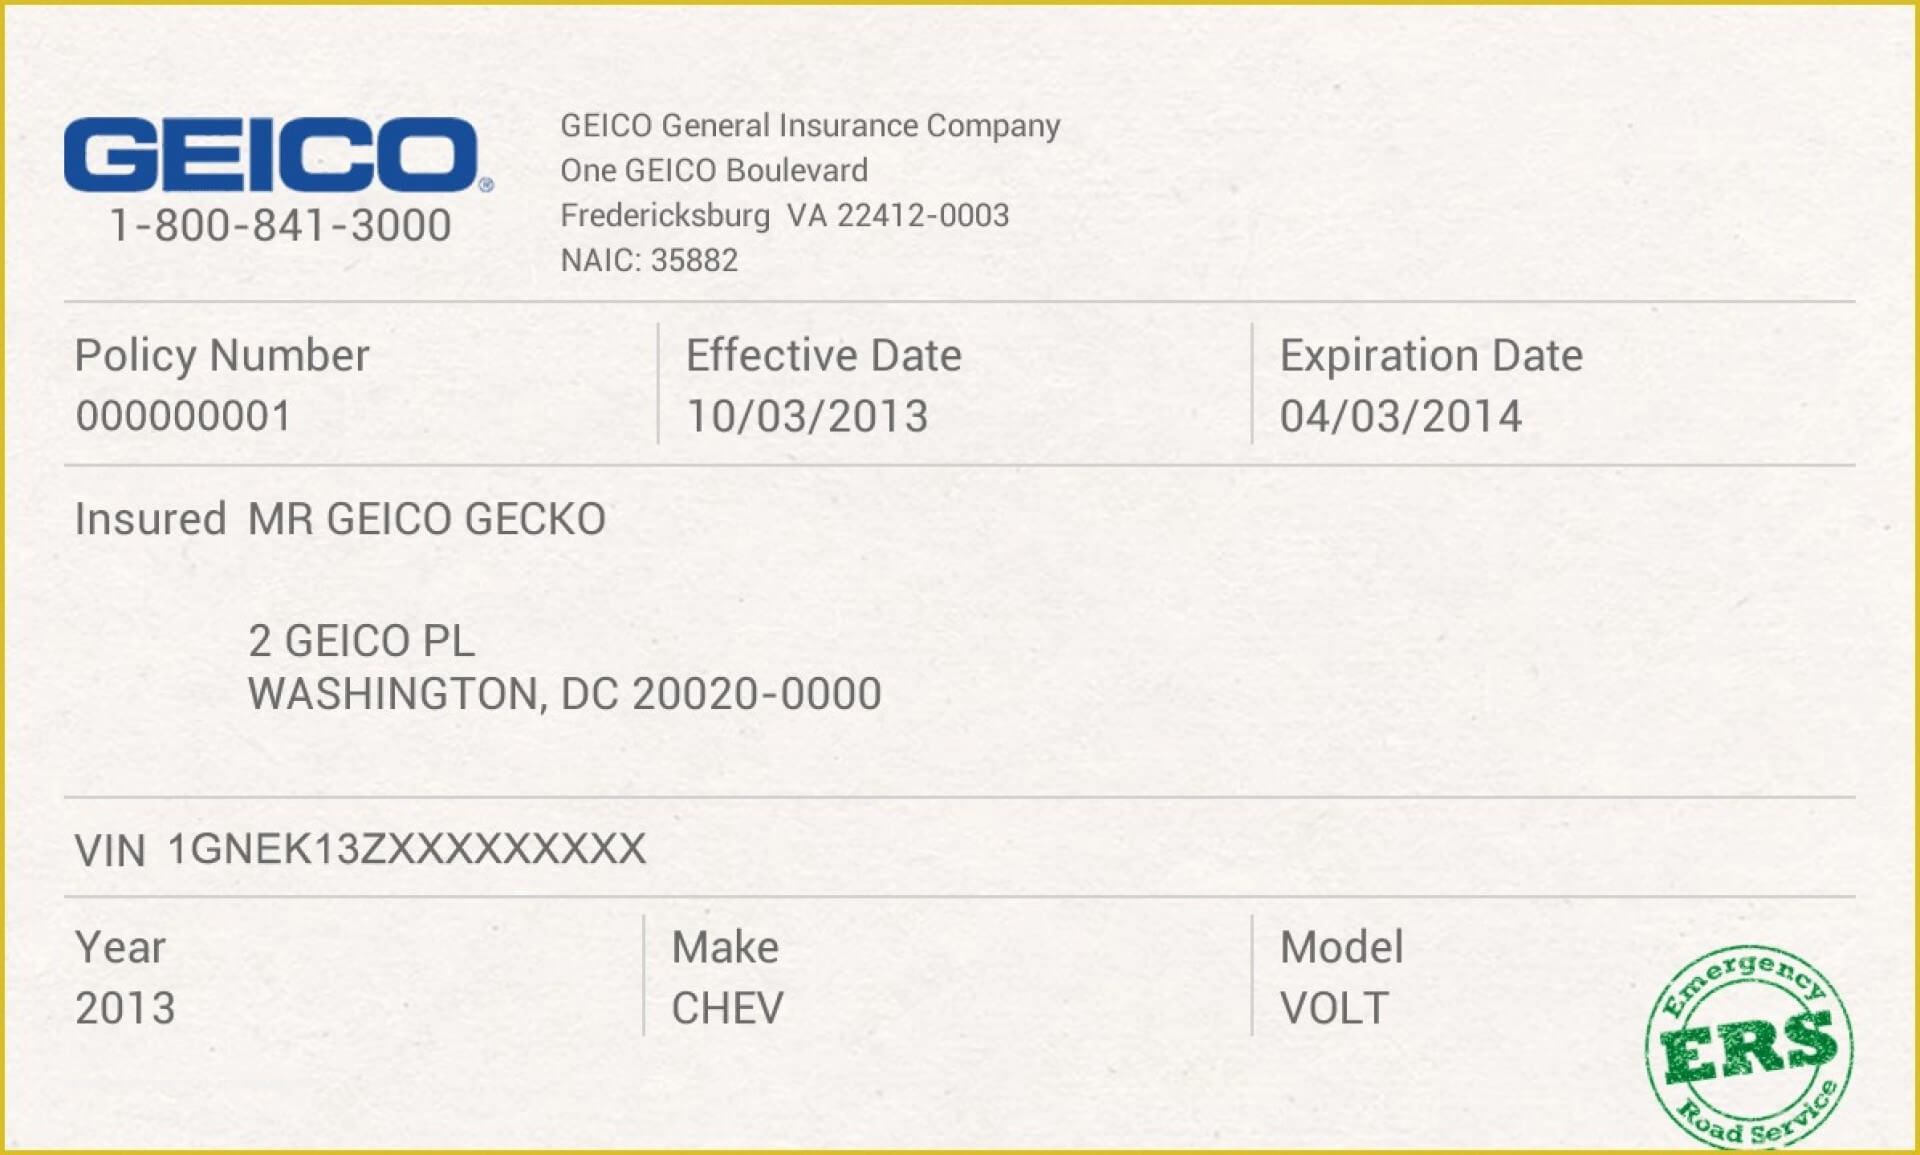 012 Company Car Policy Template Free Auto Insurance Id Card Throughout Auto Insurance Card Template Free Download